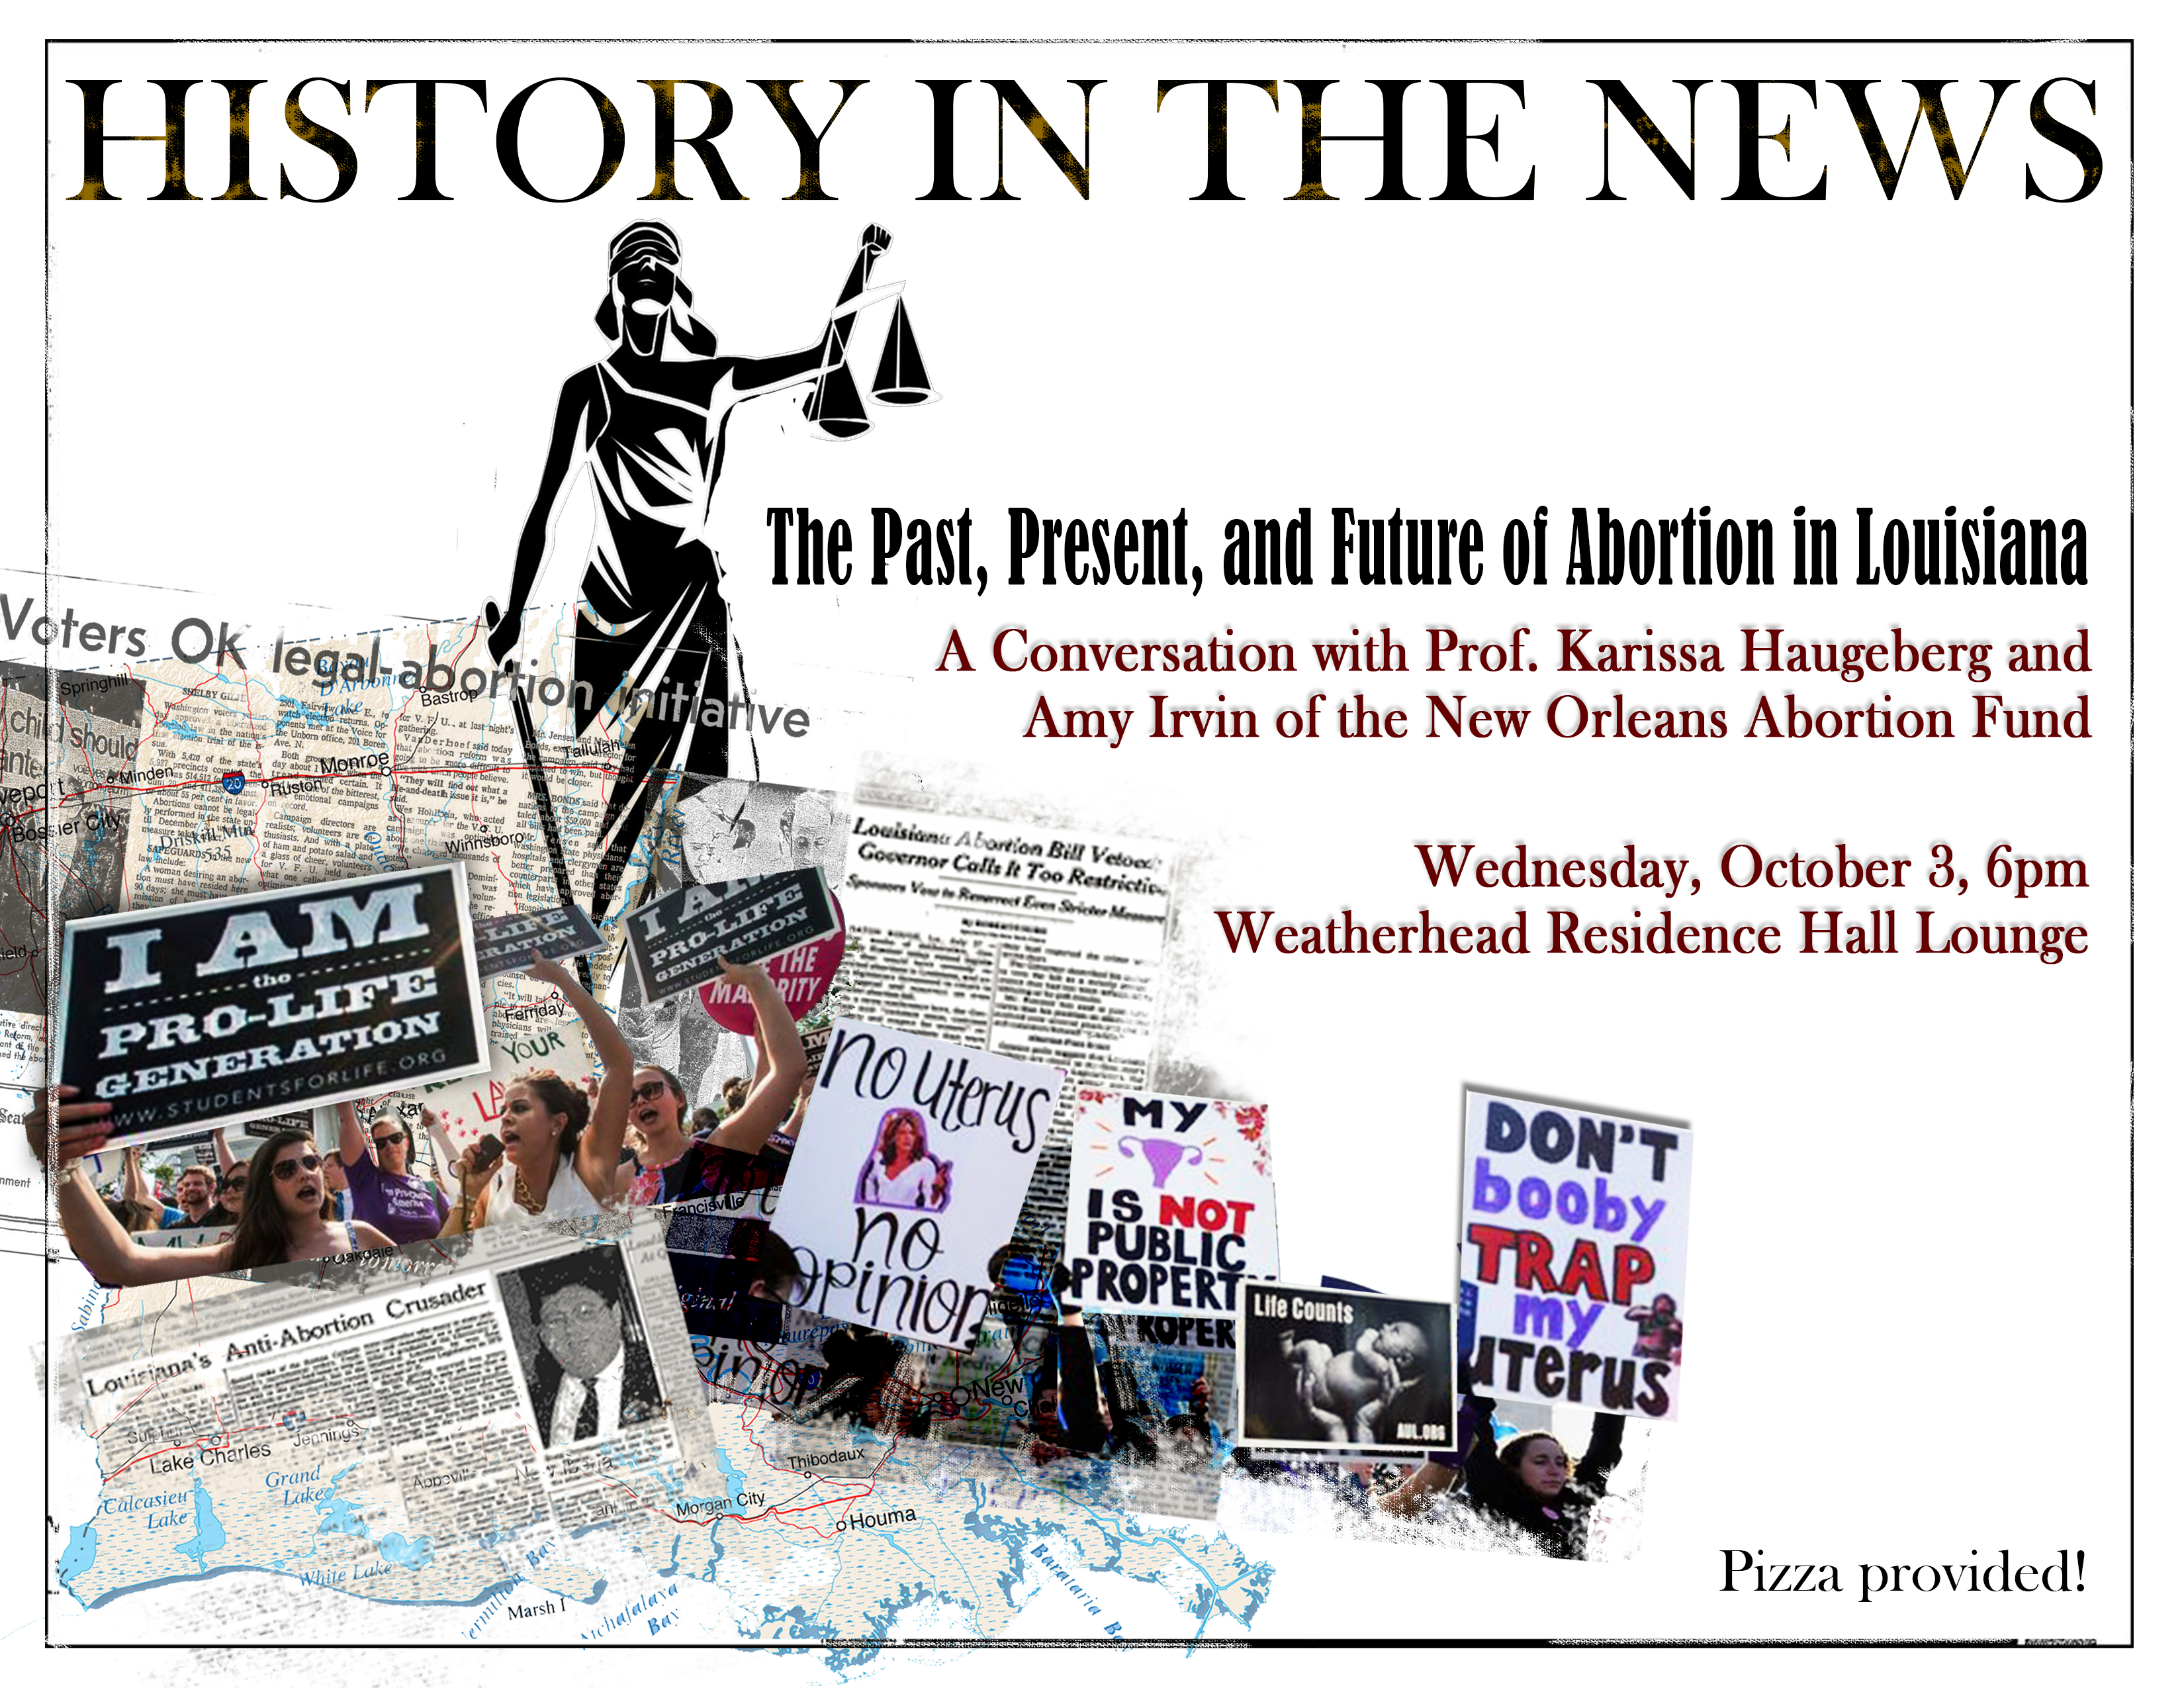 The Past, Present, and Future of Abortion in Louisiana Event flyer